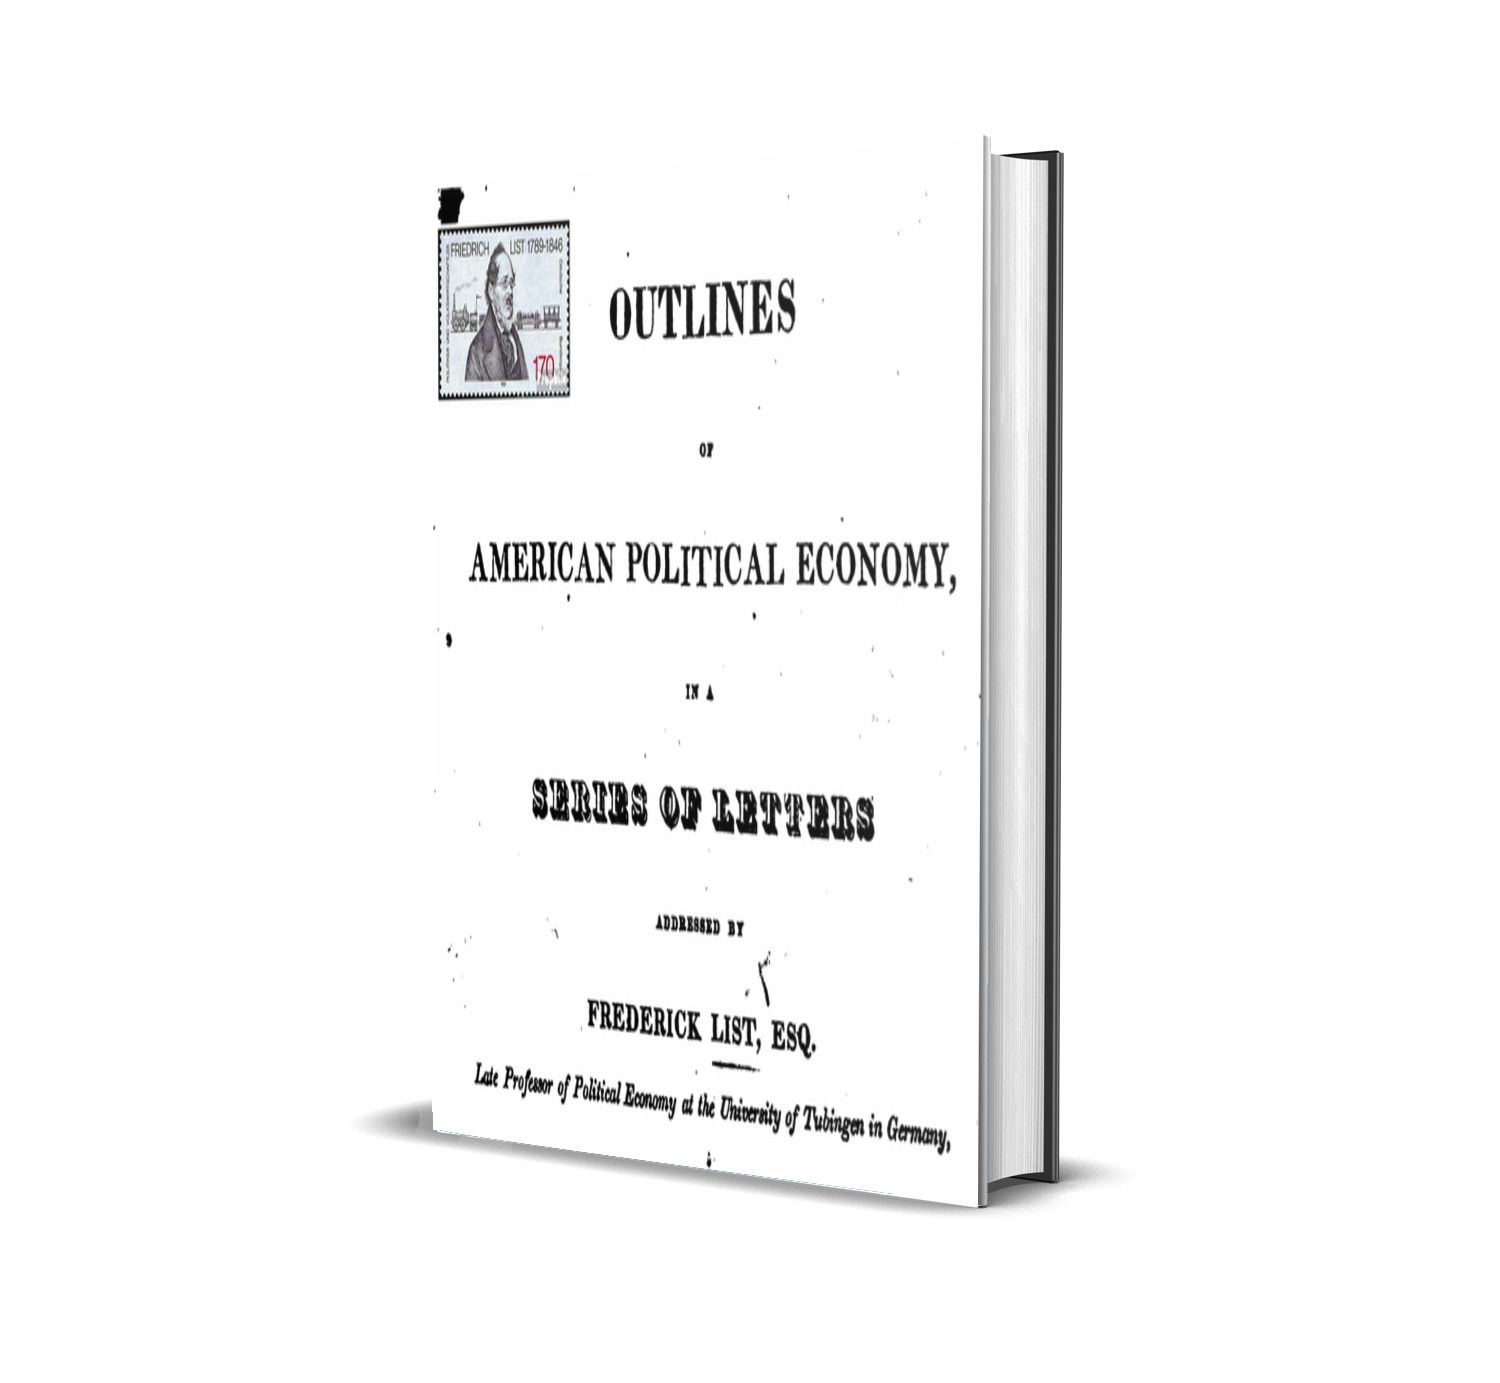 Outlines of American Political Economy by Friedrich List